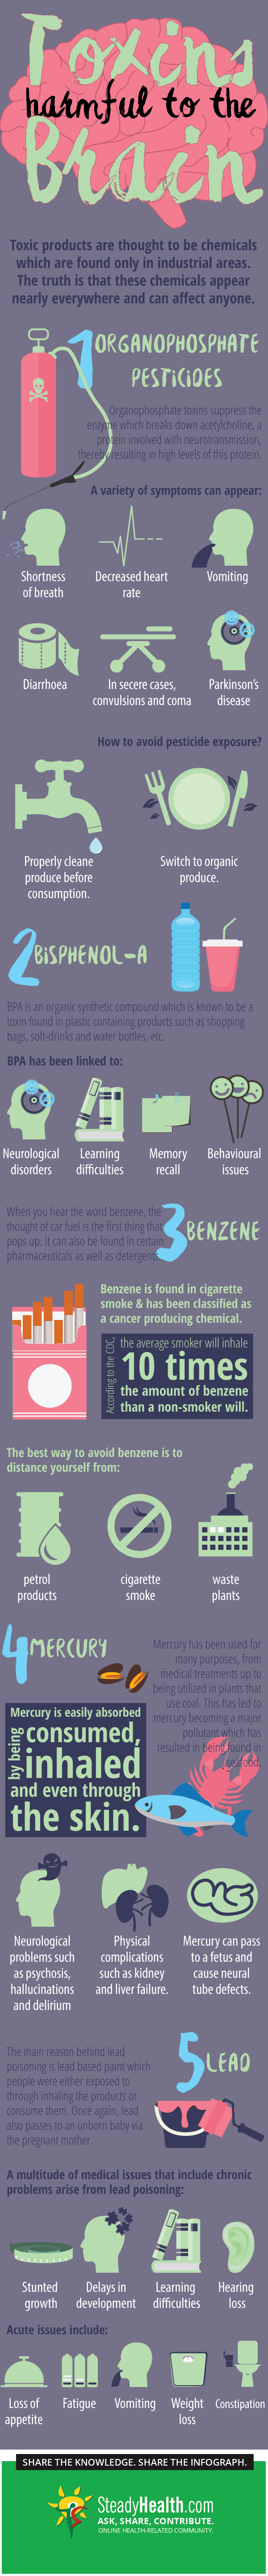 These Toxic Chemicals Can Be Dangerous For Your Brain Health Infographic